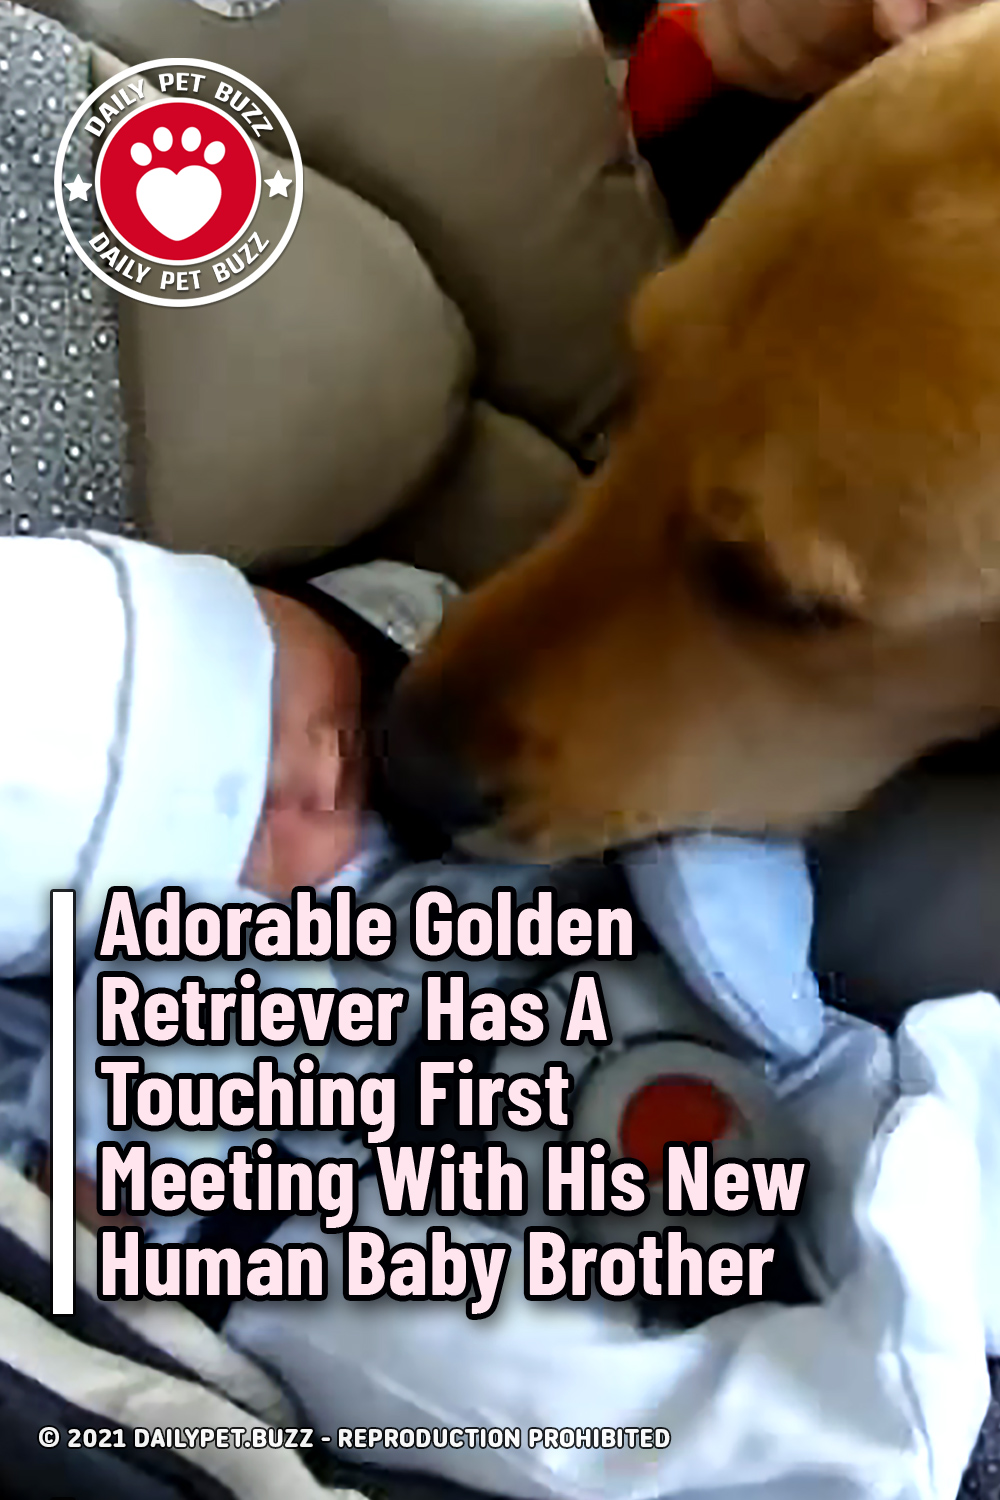 Adorable Golden Retriever Has A Touching First Meeting With His New Human Baby Brother